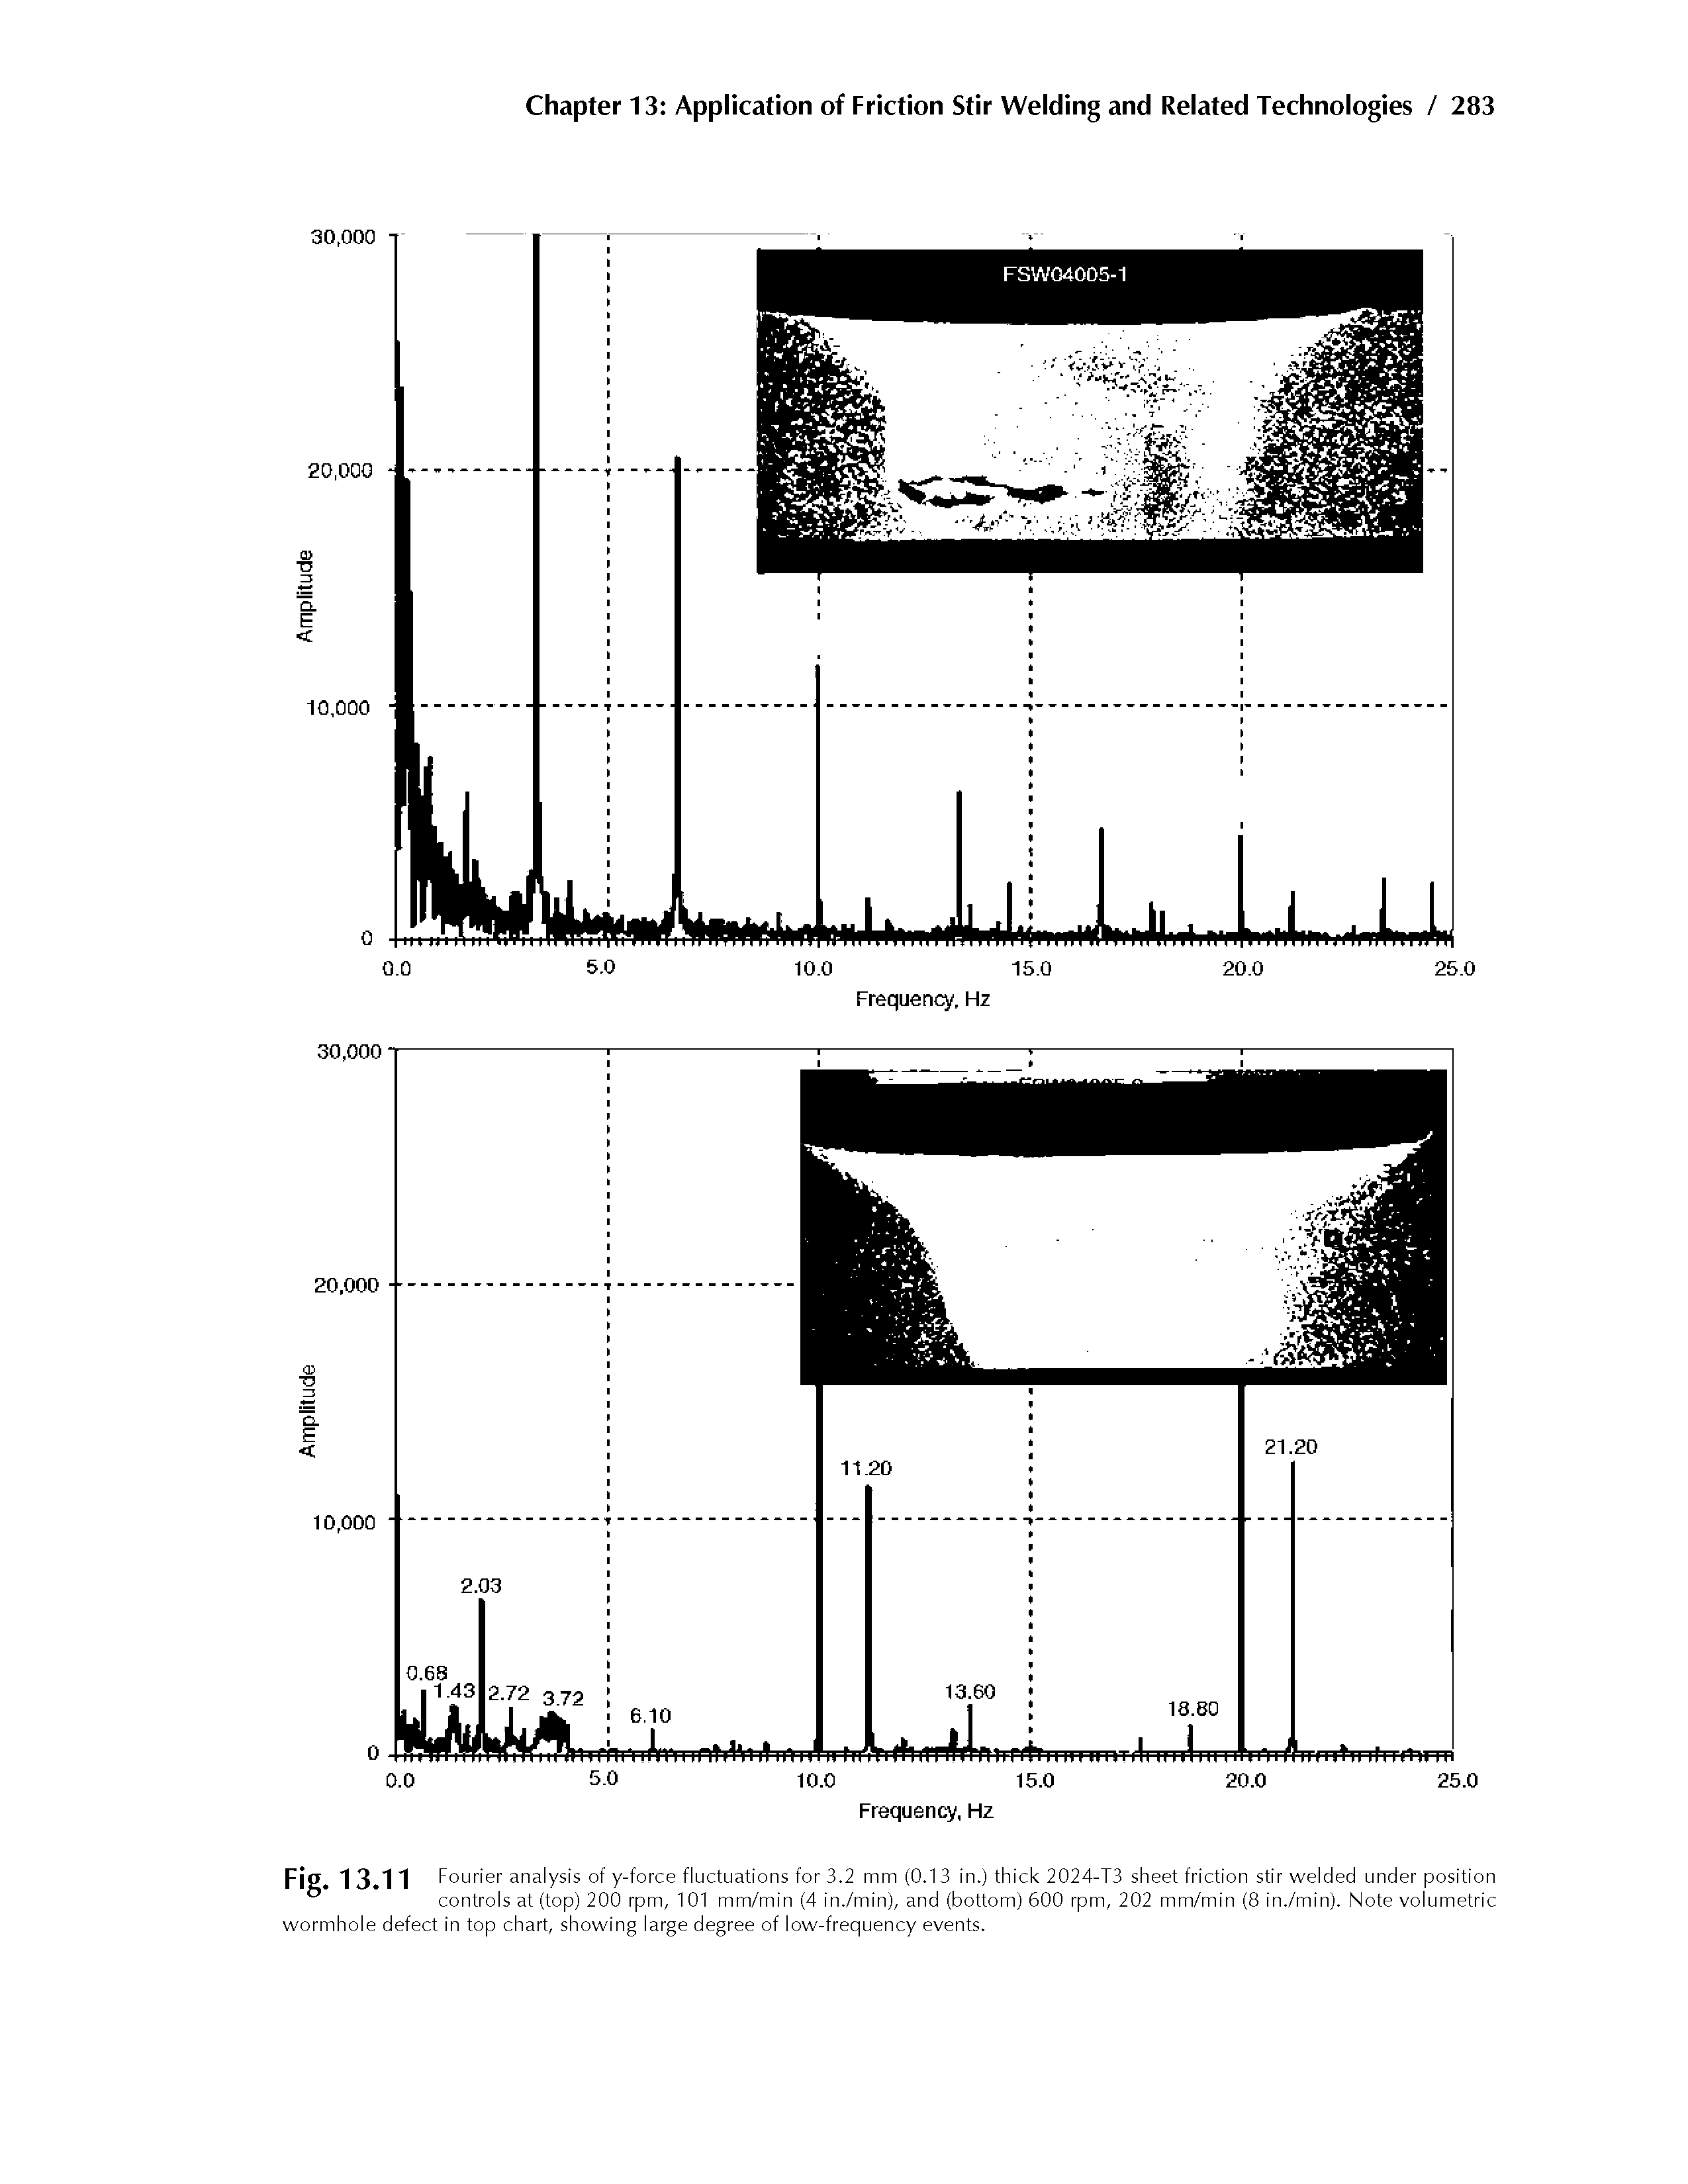 Fig. 1 3.11 Fourier analysis of y-force fluctuations for 3.2 mm (0.13 in.) thick 2024-T3 sheet friction stir welded under position controls at (top) 200 rpm, 101 mm/min (4 in./min), and (bottom) 500 rpm, 202 mm/min (8 in./min). Note volumetric wormhole defect in top chart, showing large degree of low-frequency events.